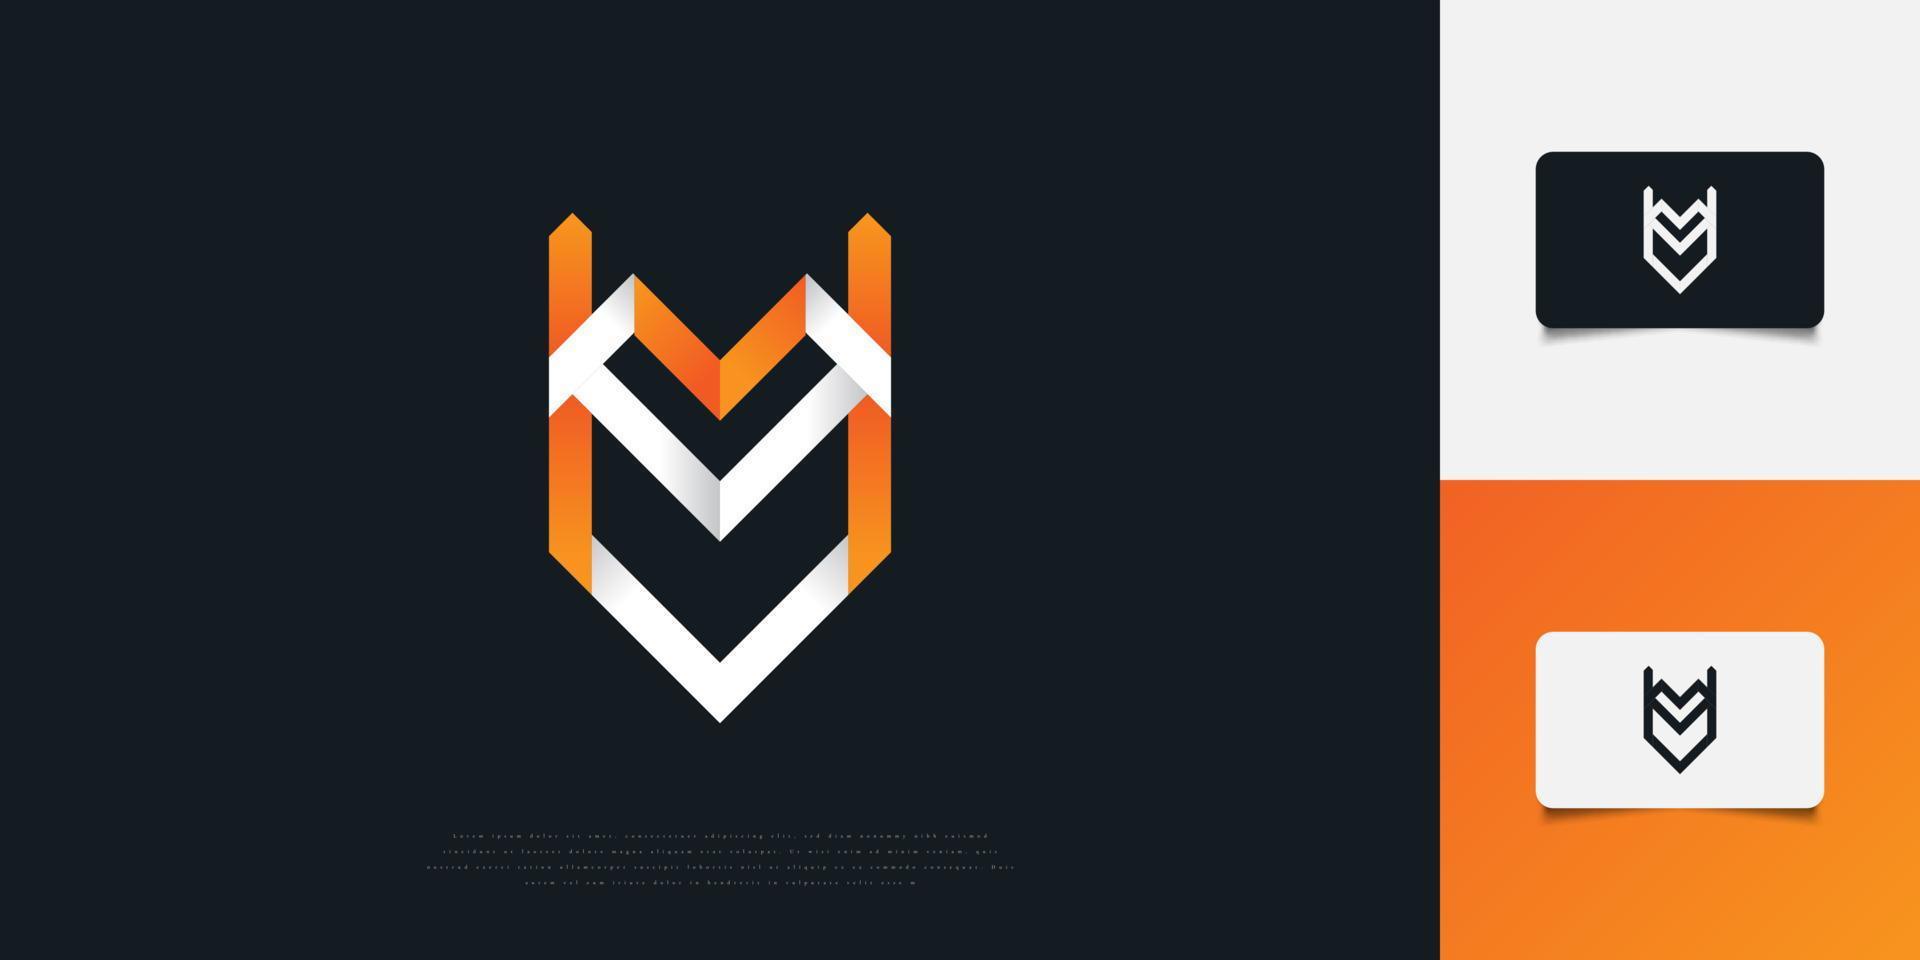 Abstract and Modern Initial Letter V and U Logo Design in White and Orange Gradient. VU or UV Monogram Logo Design Template. Graphic Alphabet Symbol for Corporate Business Identity vector